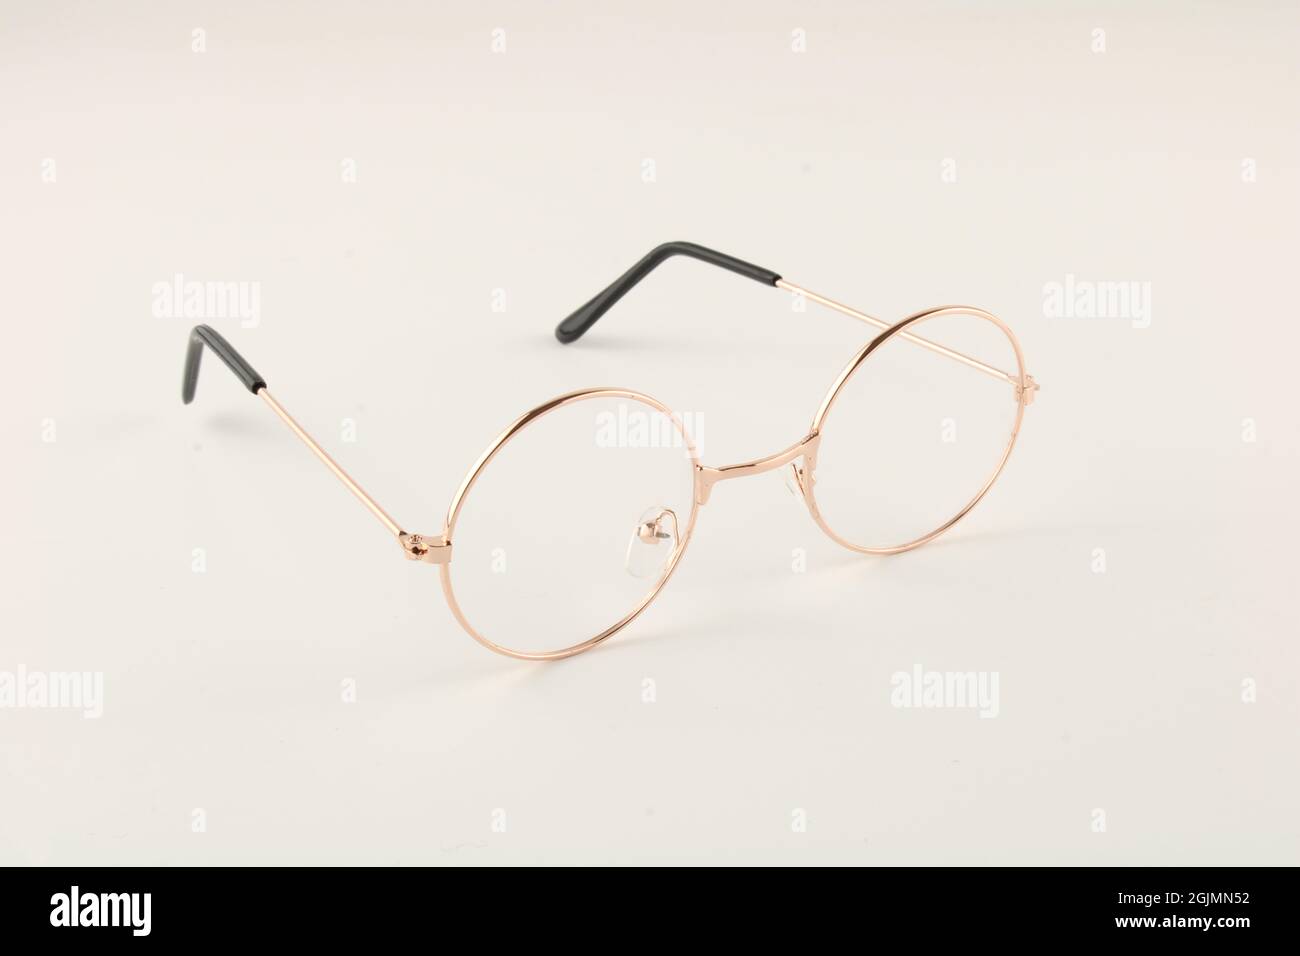 Vintage circle eye glasses also known as tea shades, 1960s spectacles isolated on plain background with copy space Stock Photo